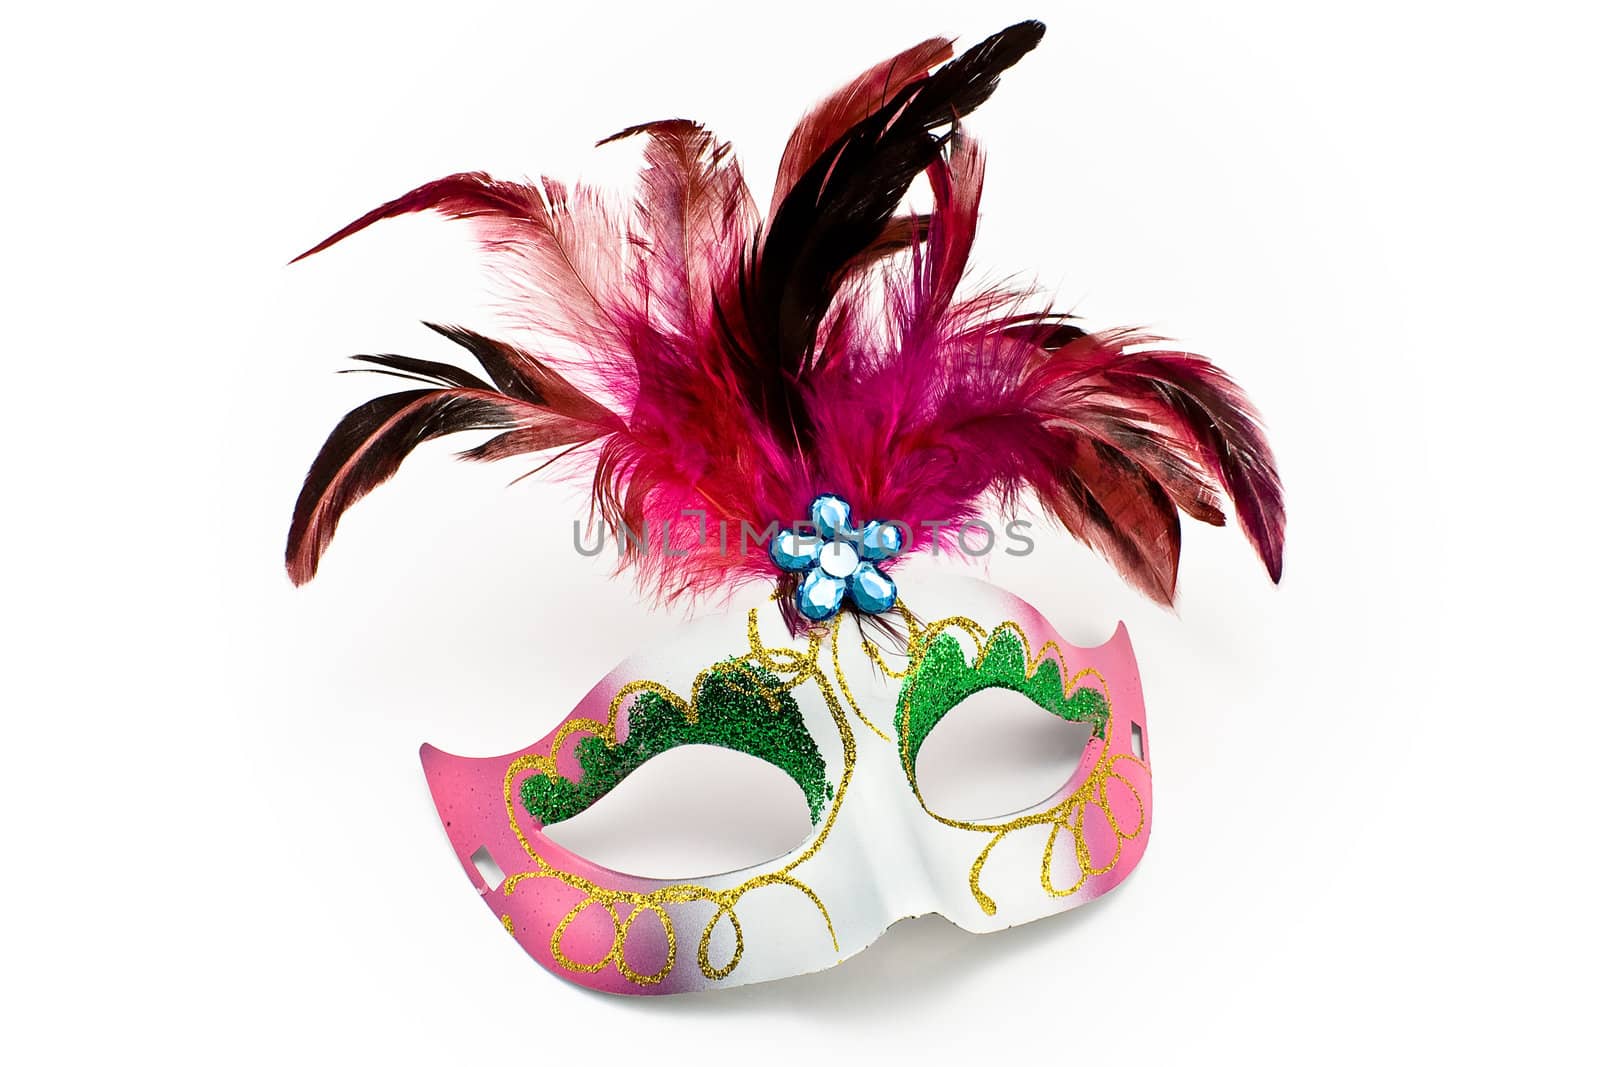 Carnival mask with feathers and diamond by gavran333